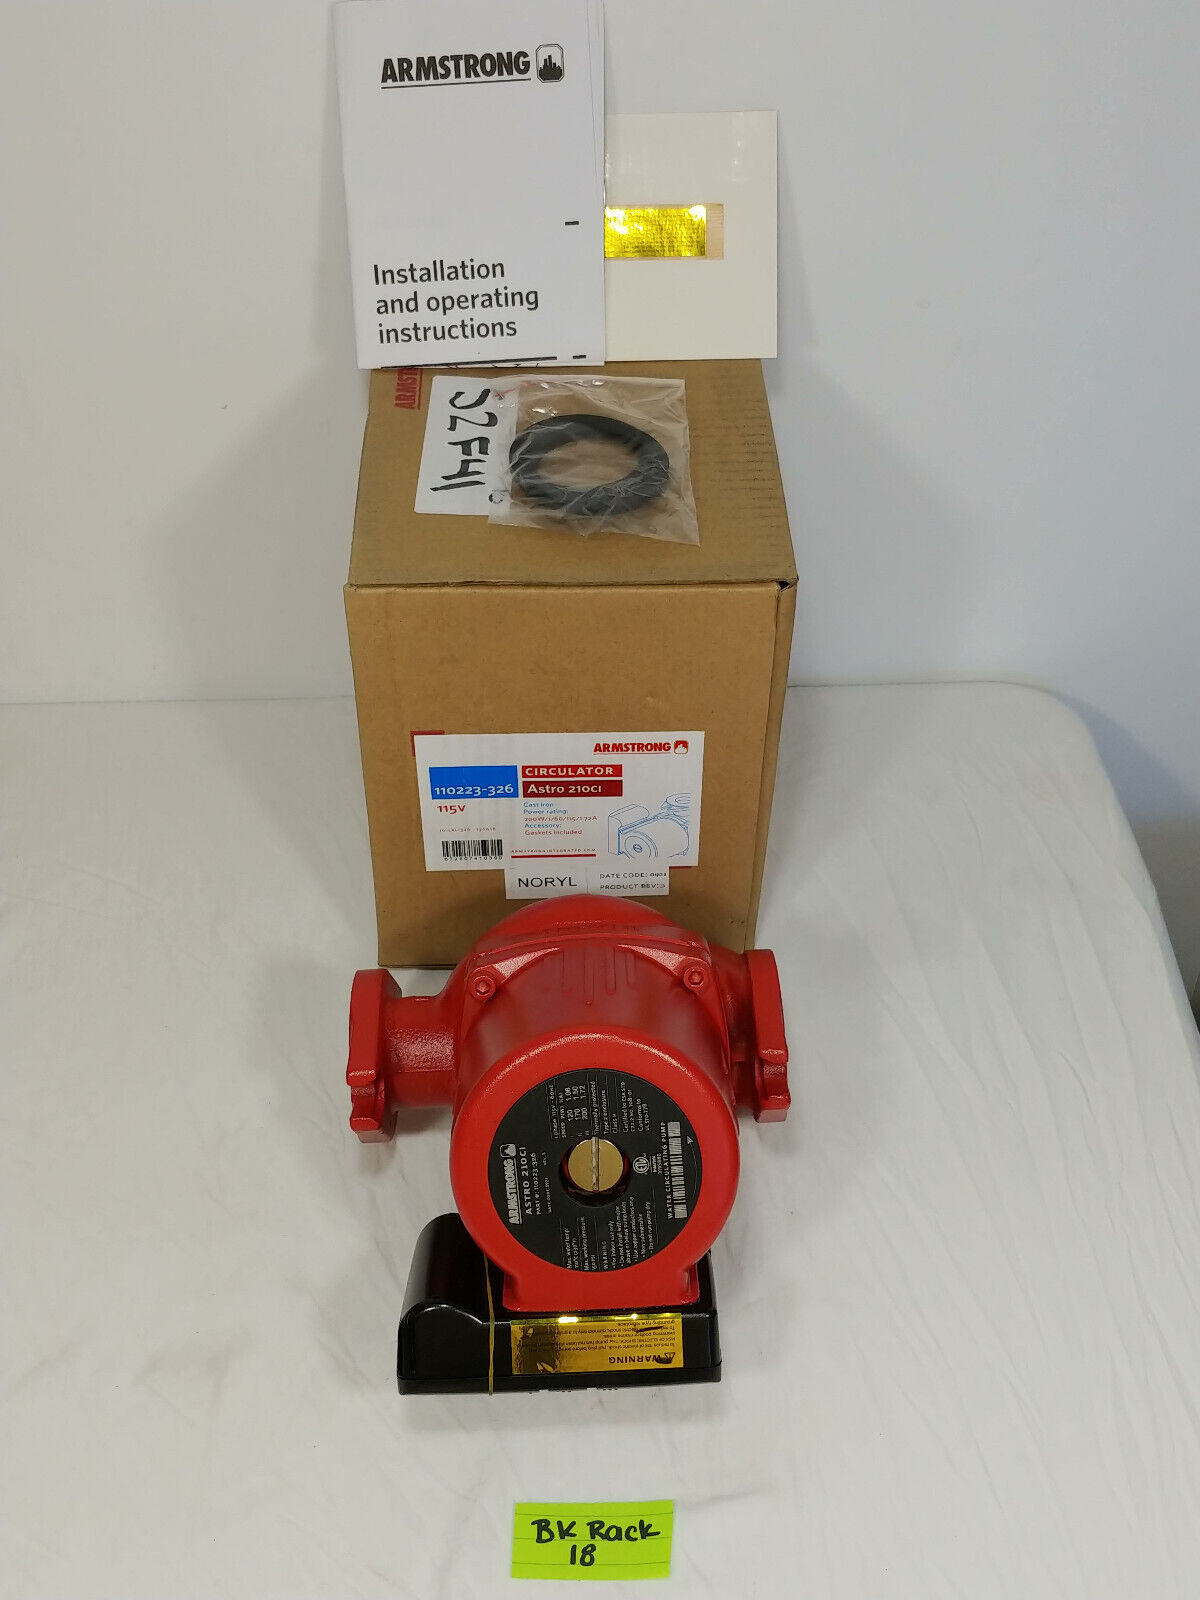 ARMSTRONG PUMPS INC. 110223-326 Hydronic Circulating Pump,Flanged